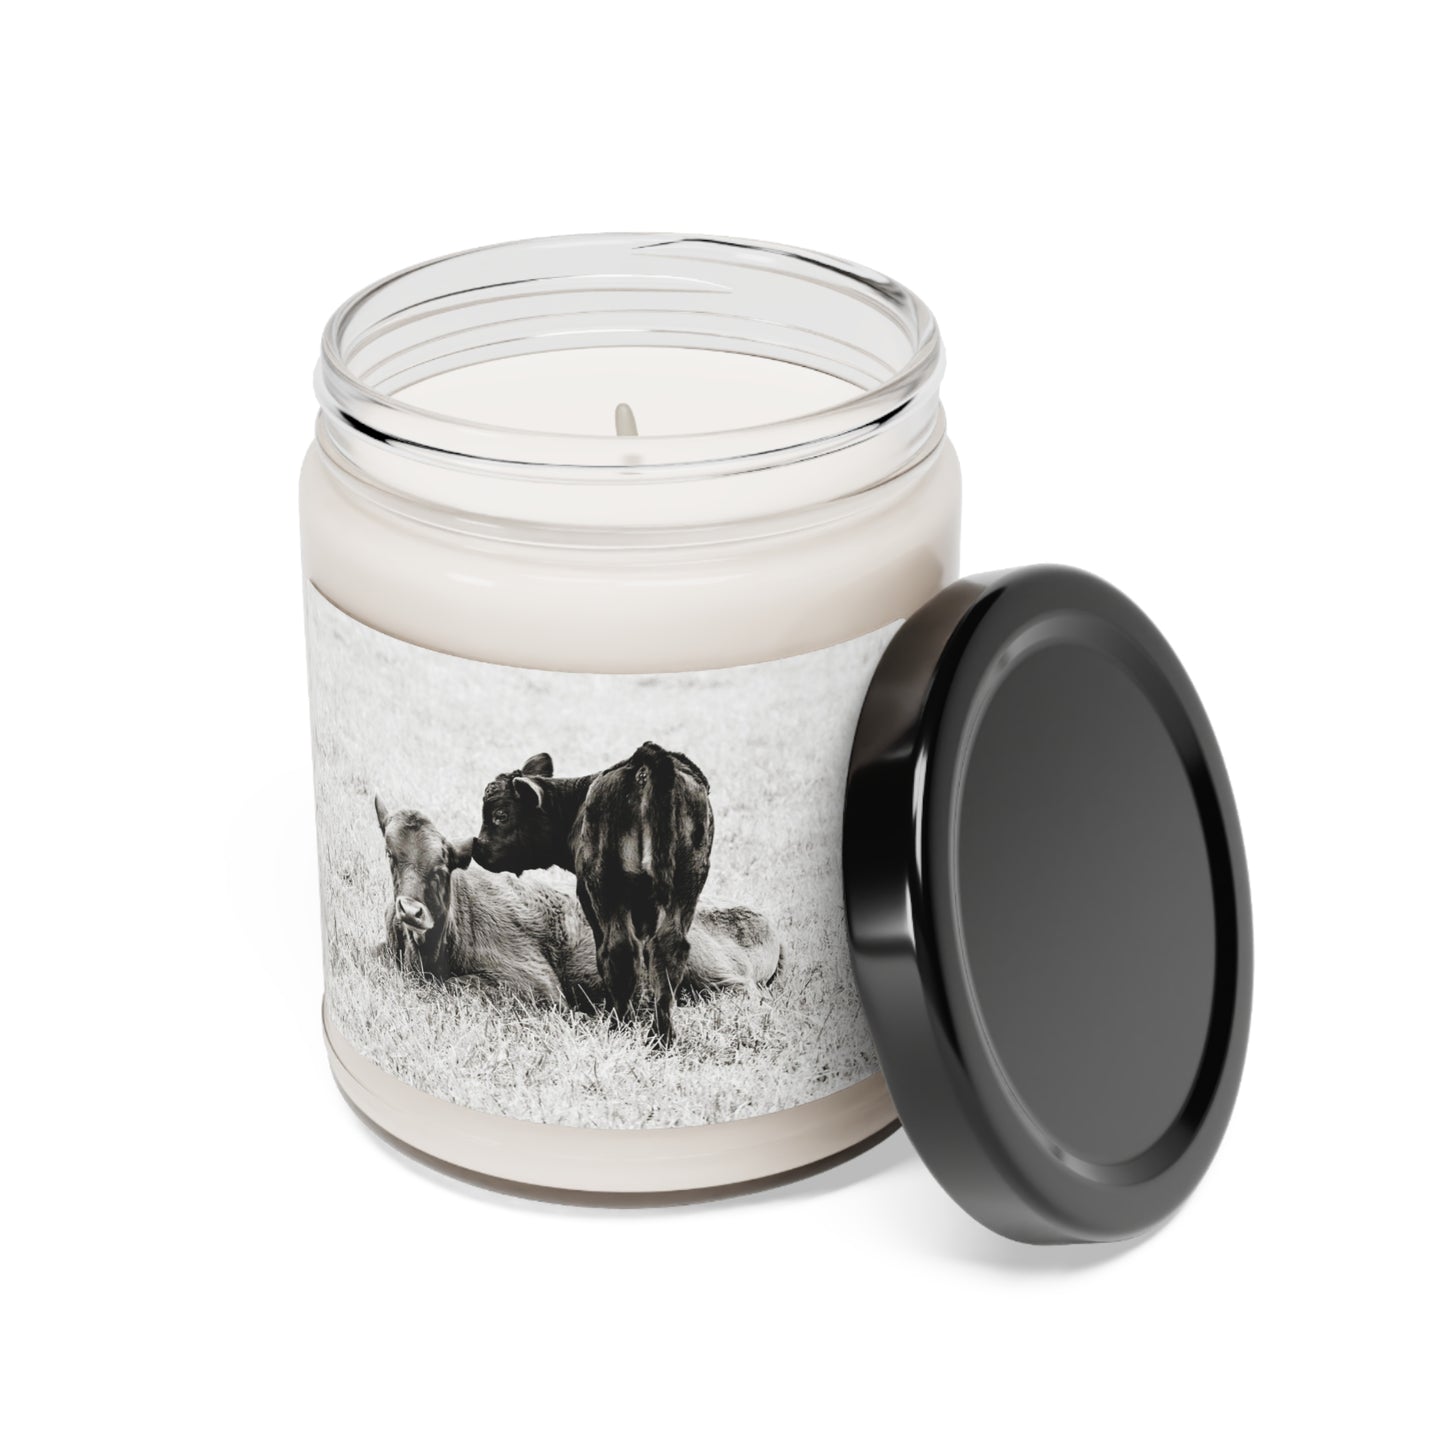 Baby Cows Snuggling Scented Soy Candle, 9oz